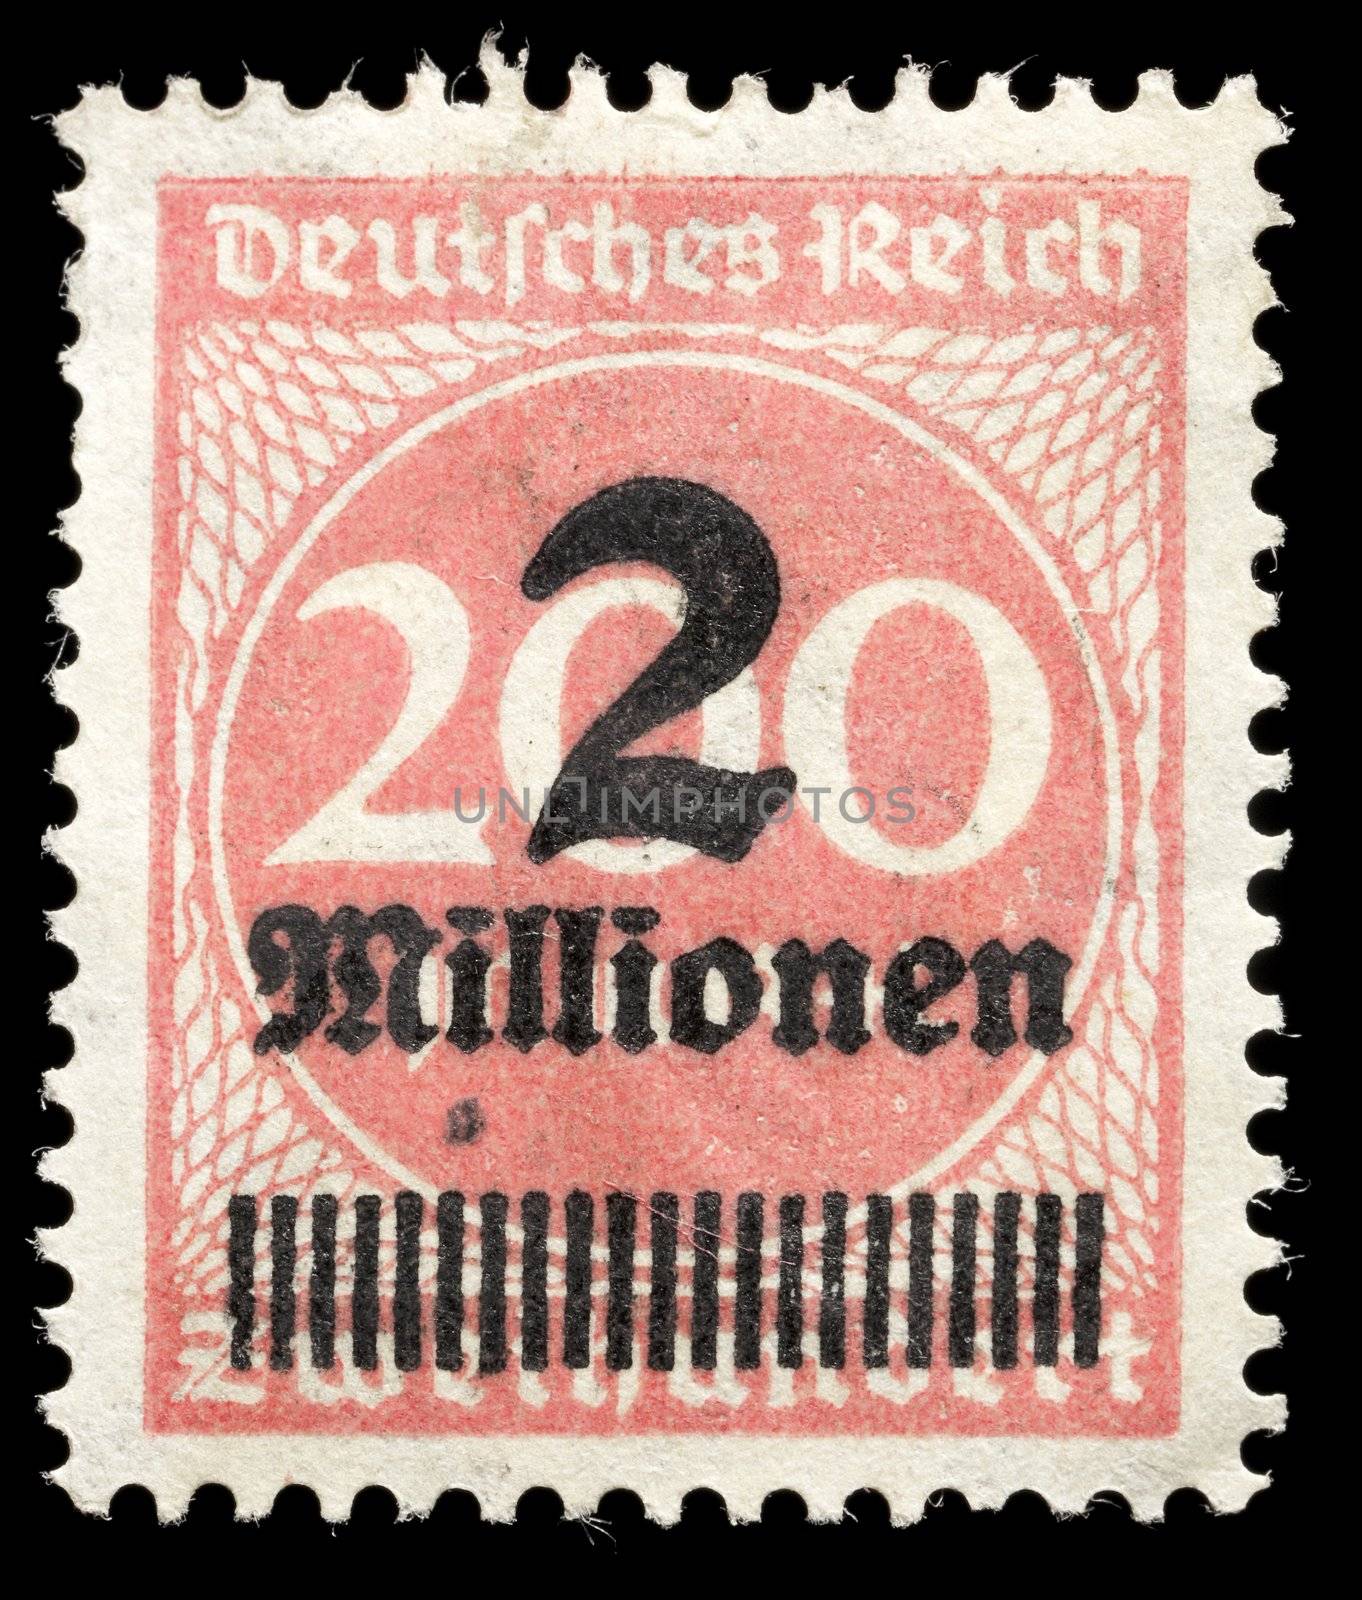 German Inflation Stamp by Stocksnapper